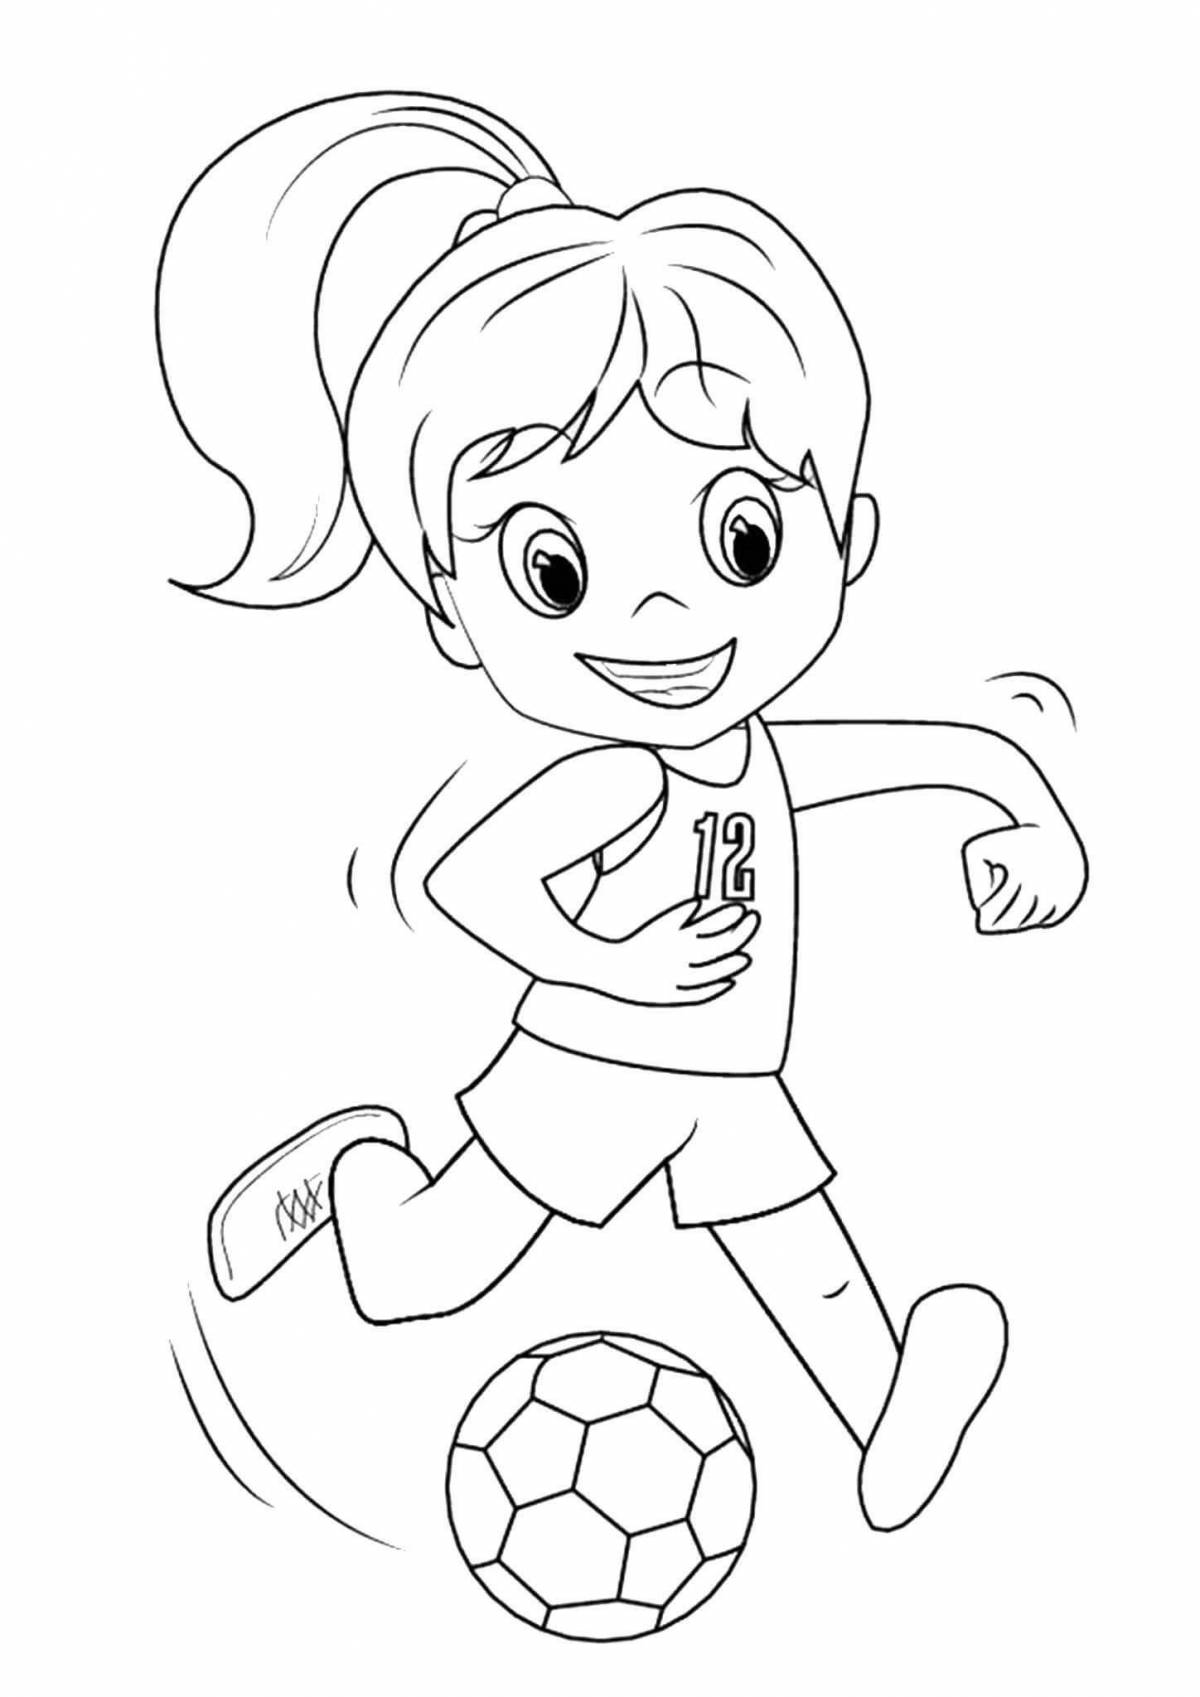 Creative sports coloring book for 5-6 year olds